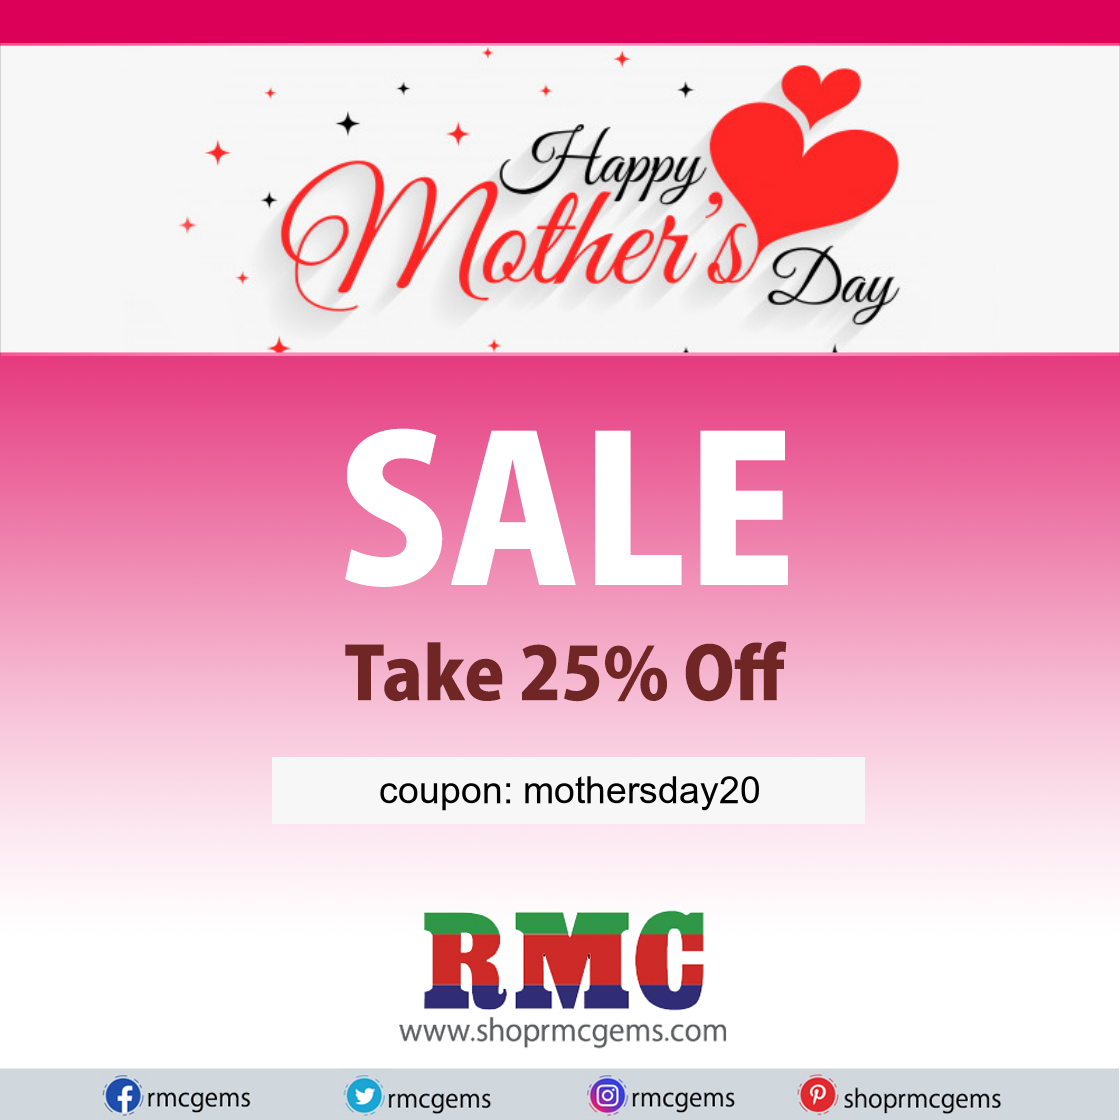 Mother's Day: Take 25% Off Select Gemstones